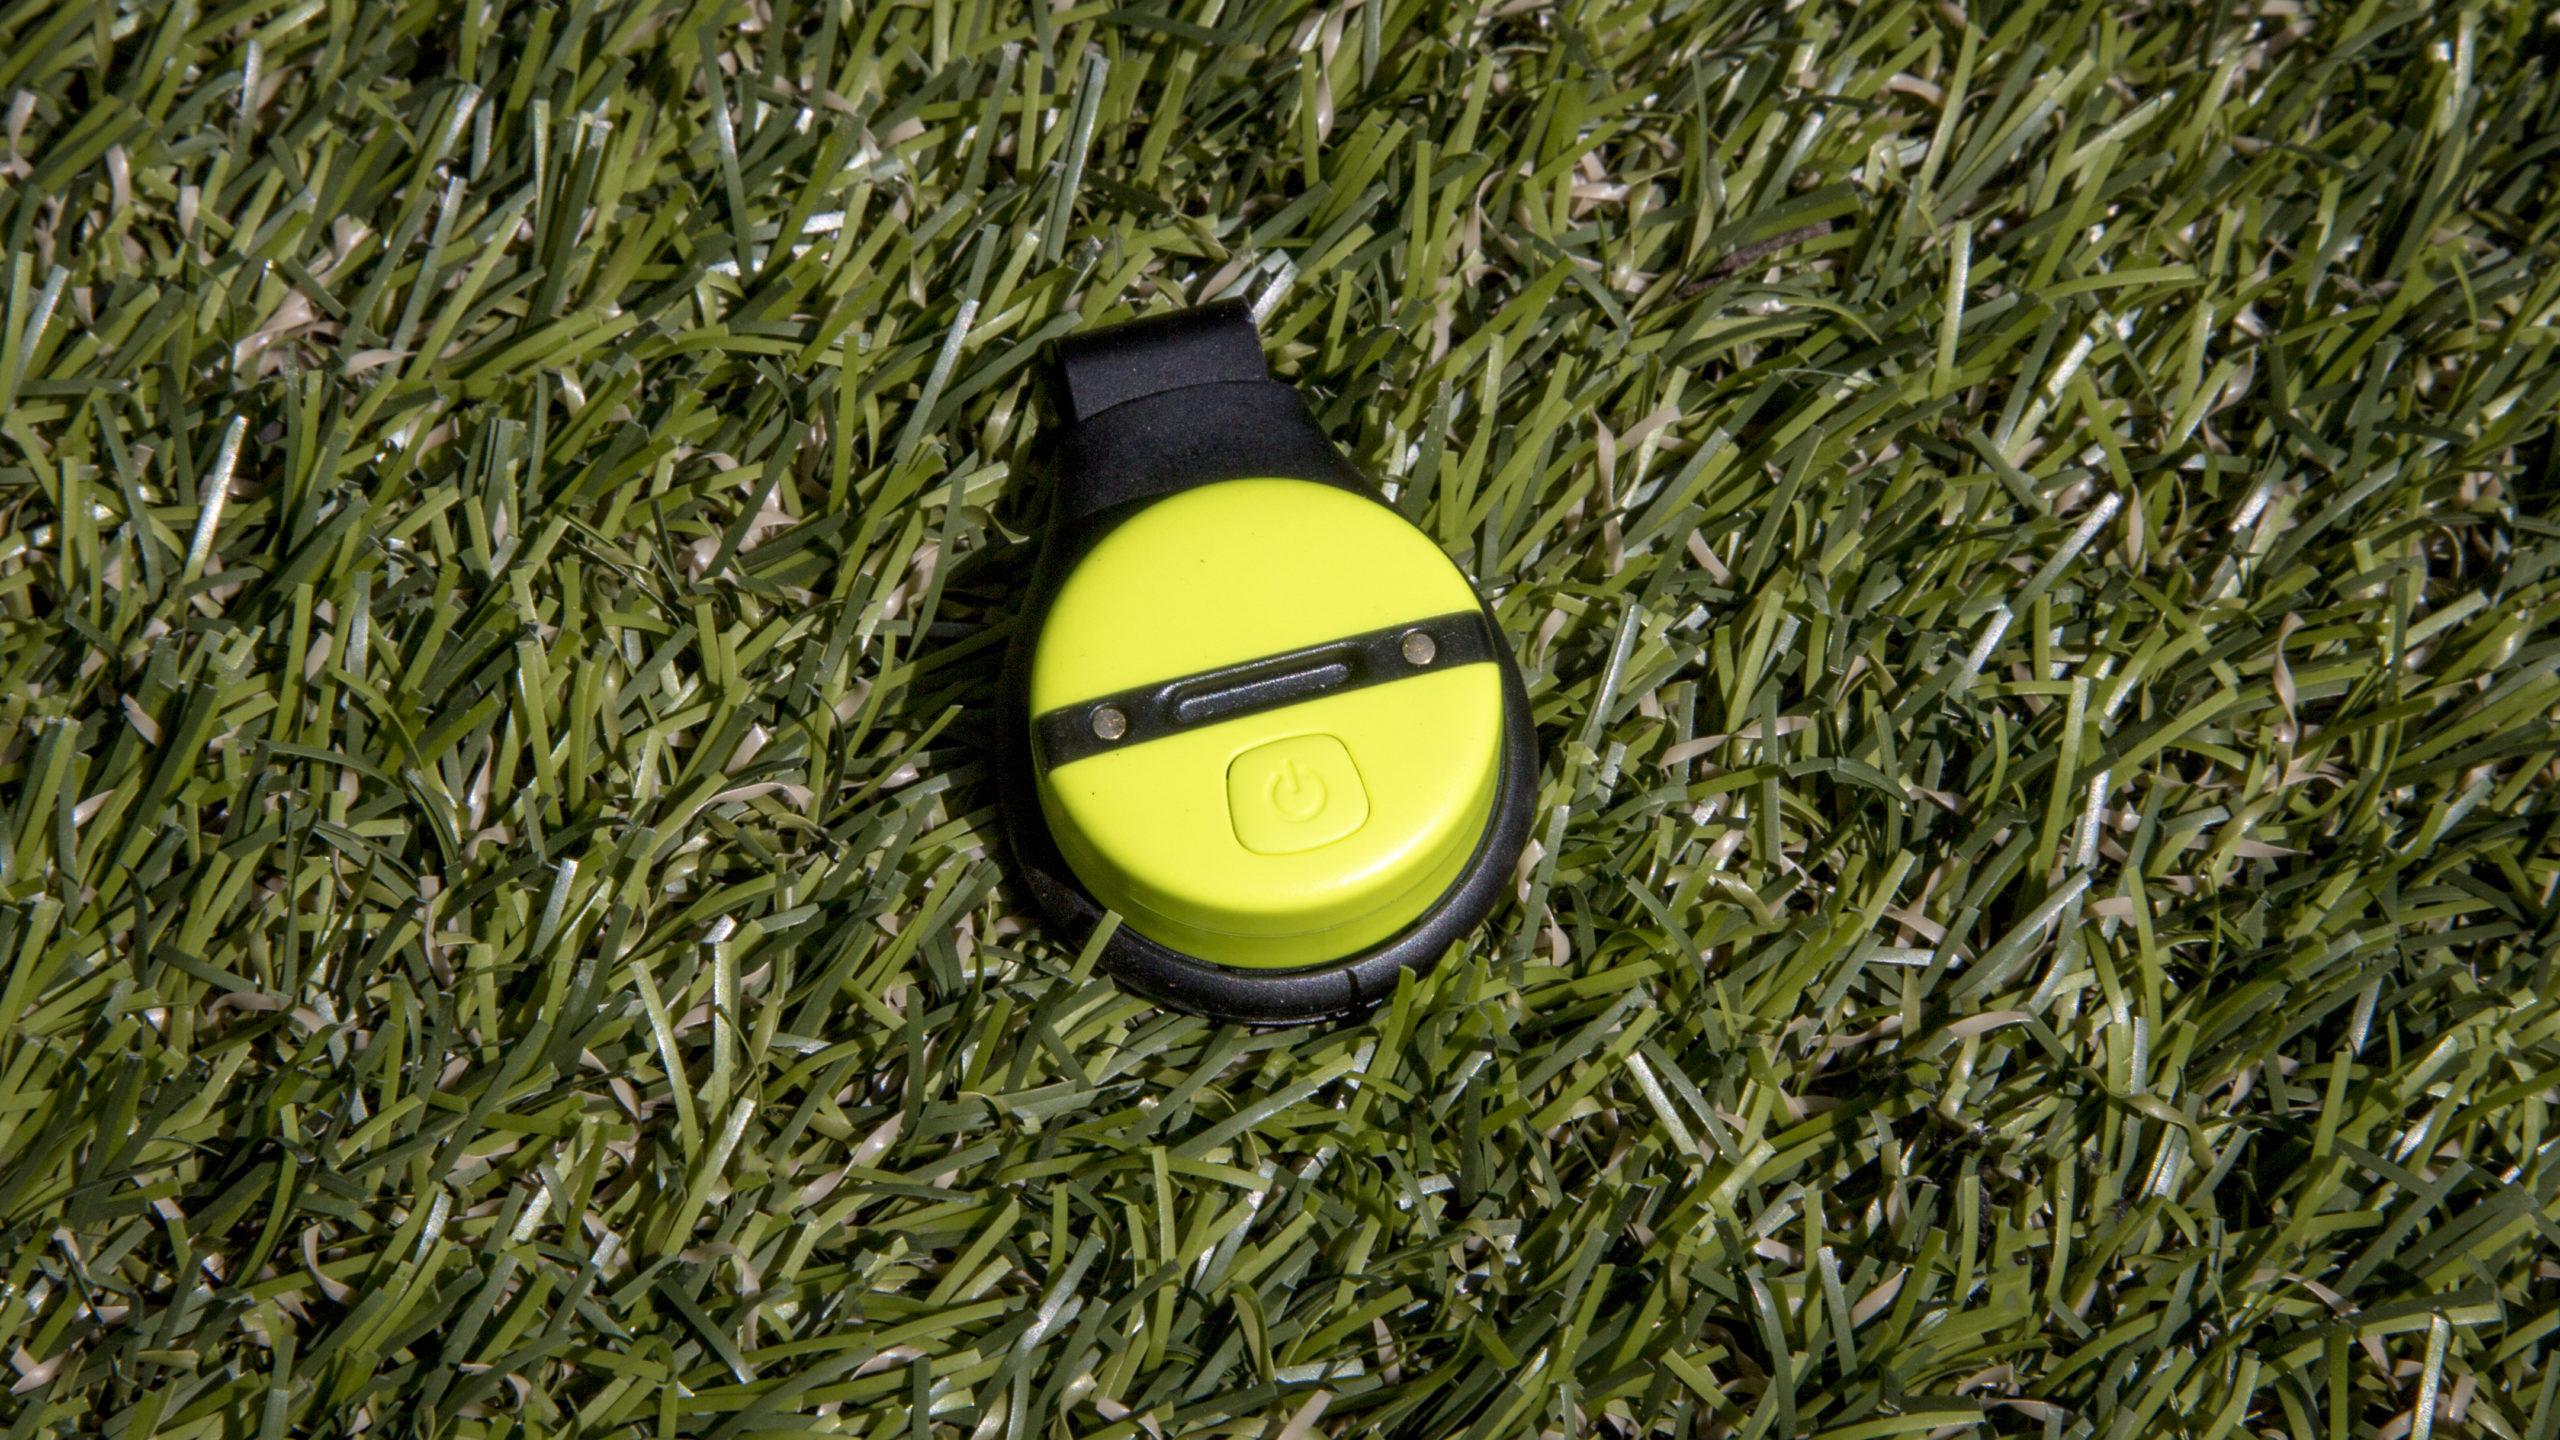 Zepp Golf 2 review: Is this golf's smartest wearable?